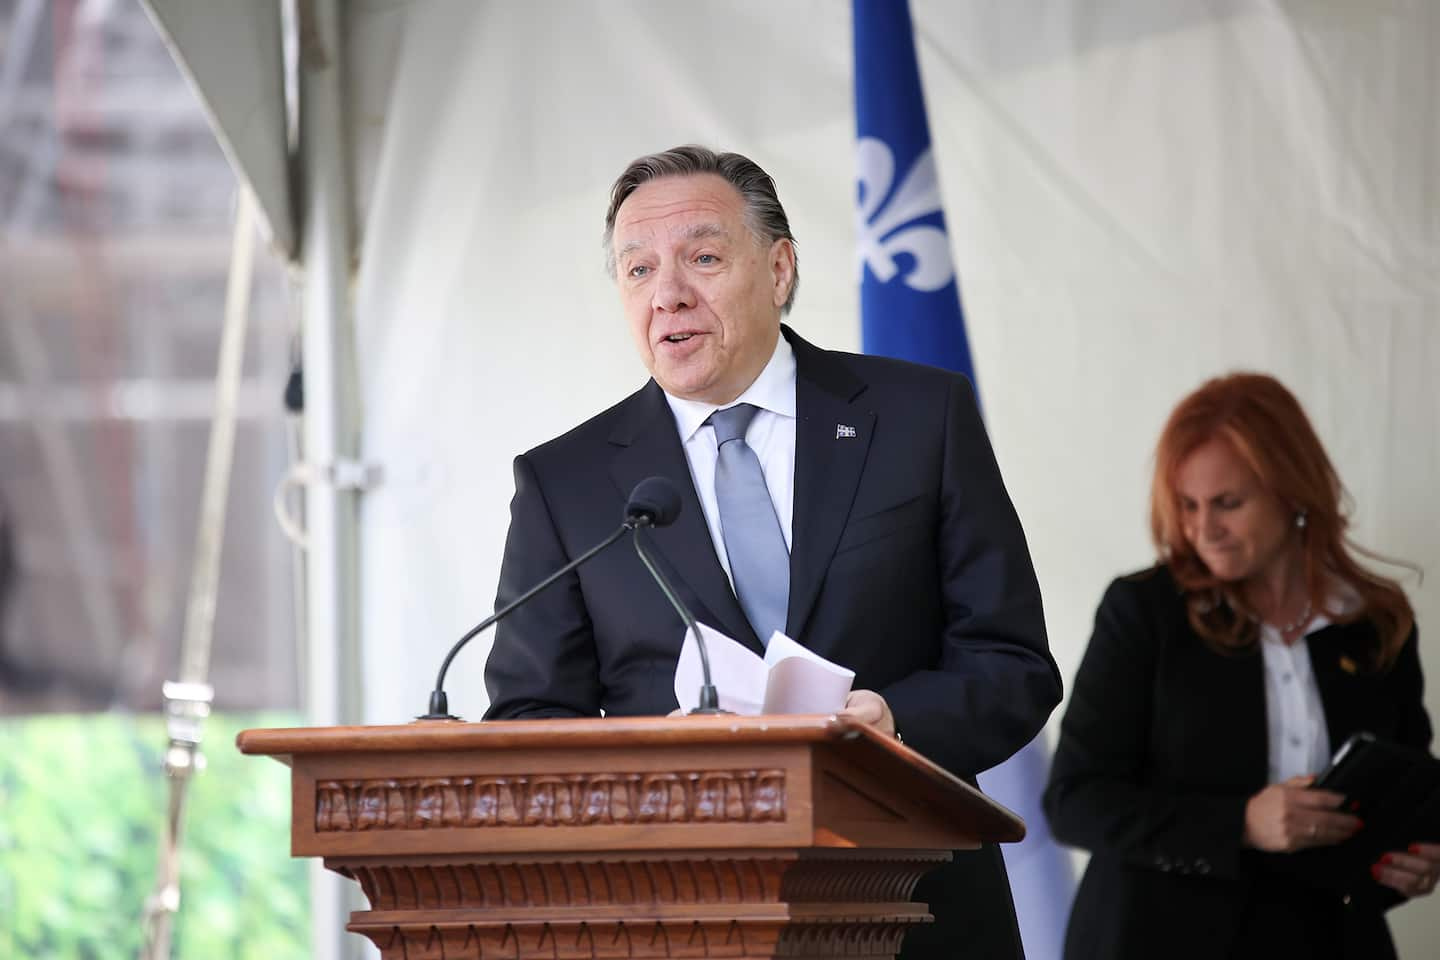 Legault knew how to connect with Quebecers